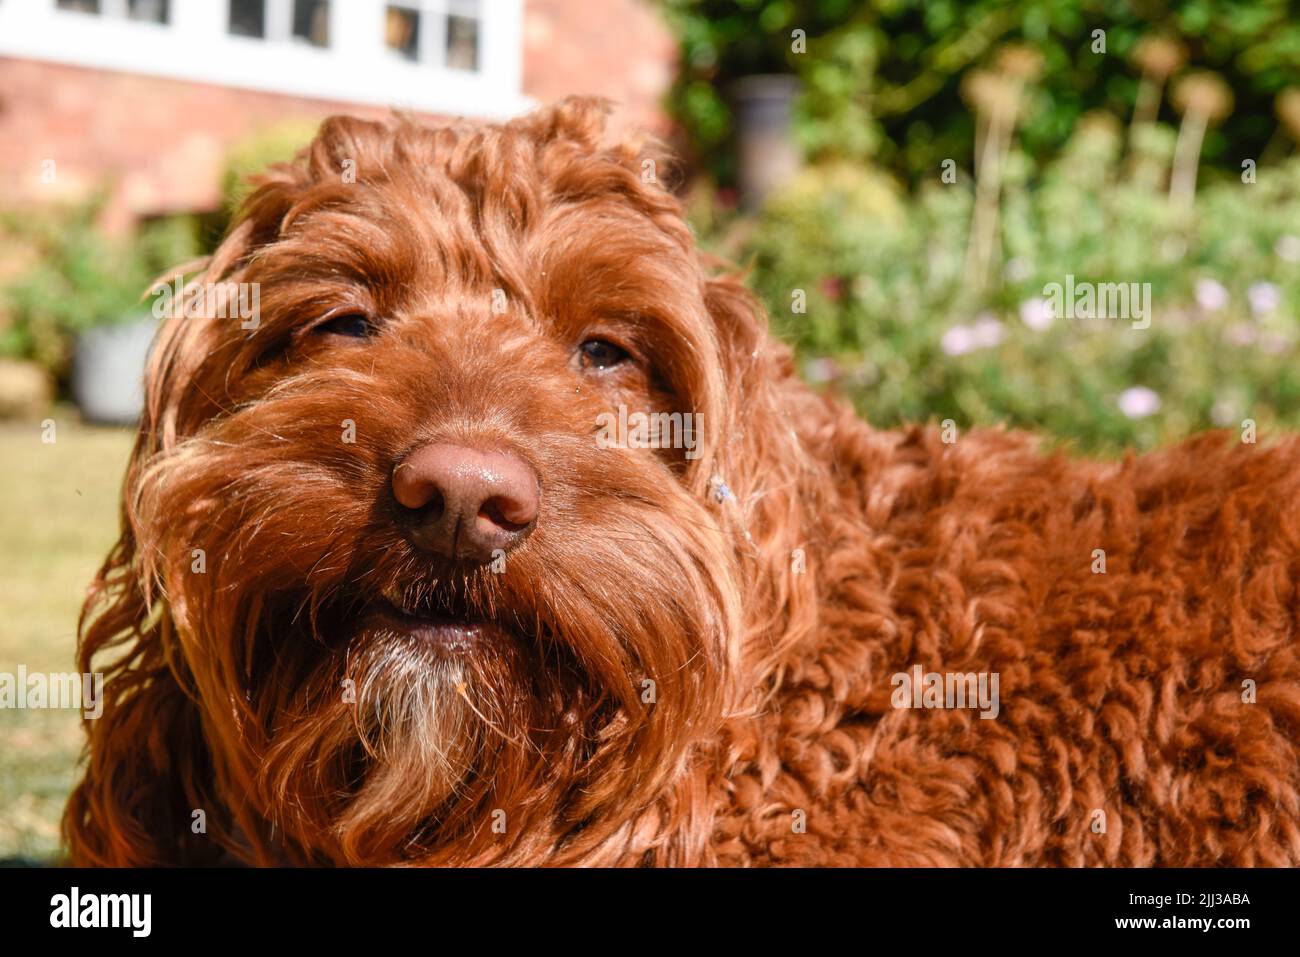 Playful happy pet dog outside in a garden on a warm sunny day Stock Photo